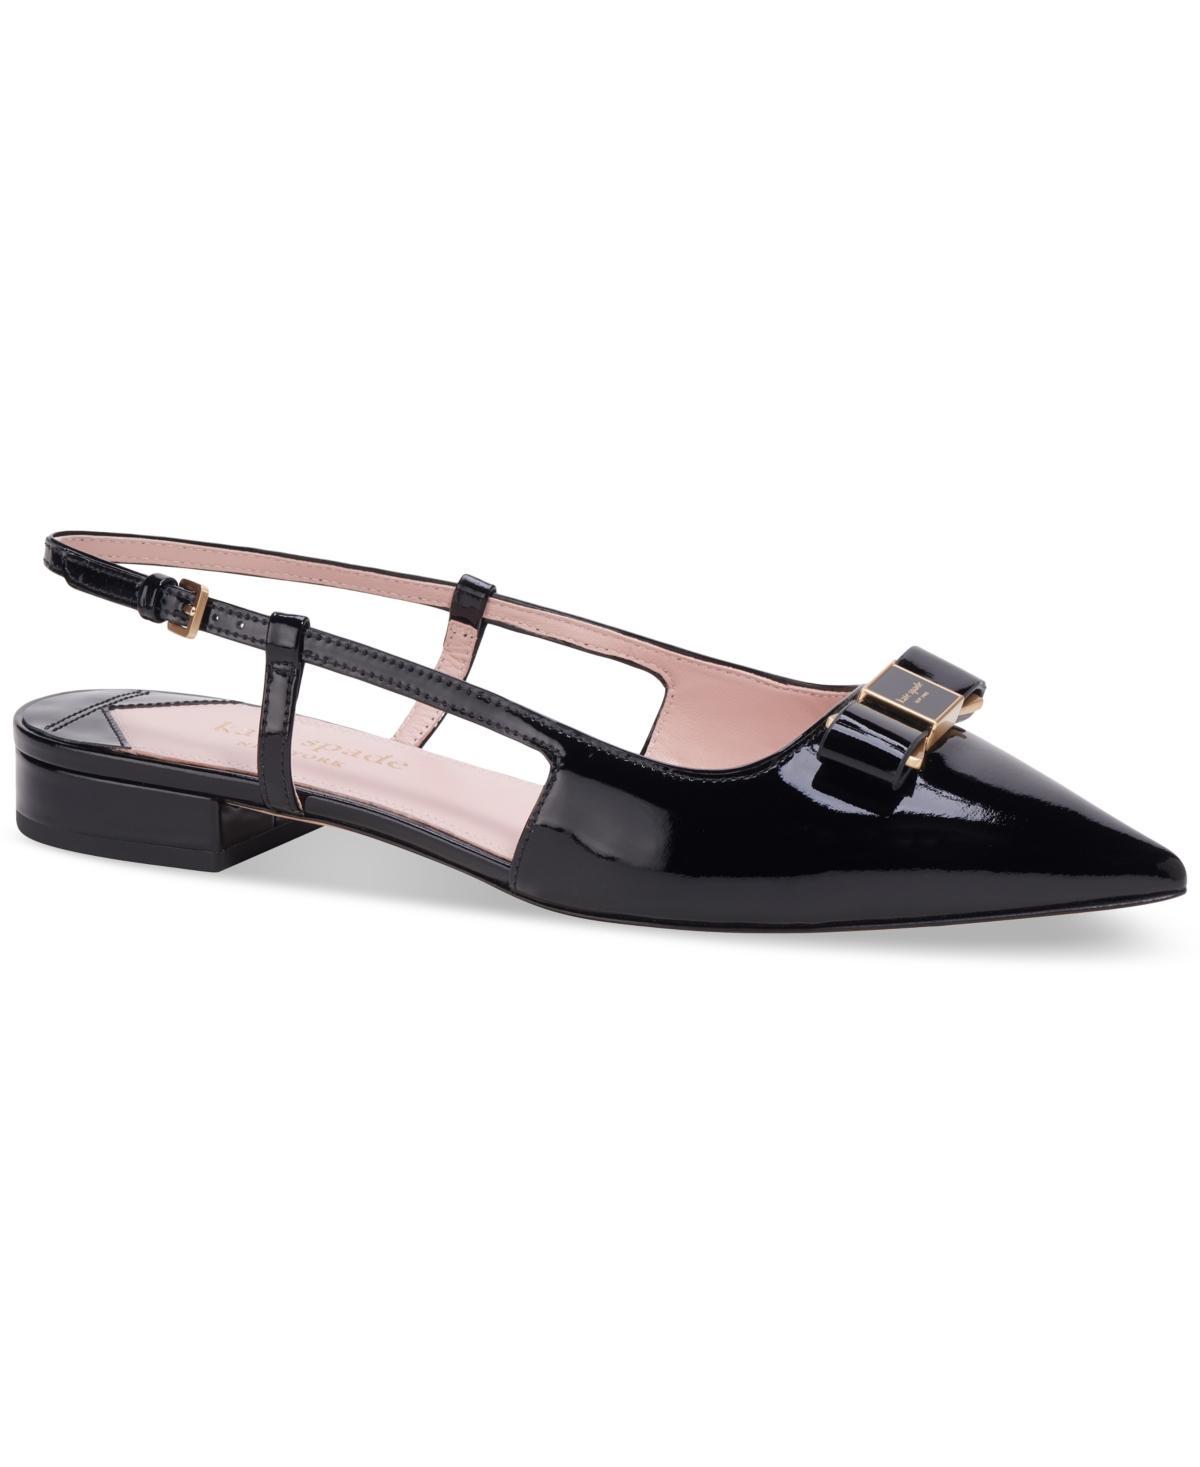 Womens Bowdie Patent Leather Flats Product Image